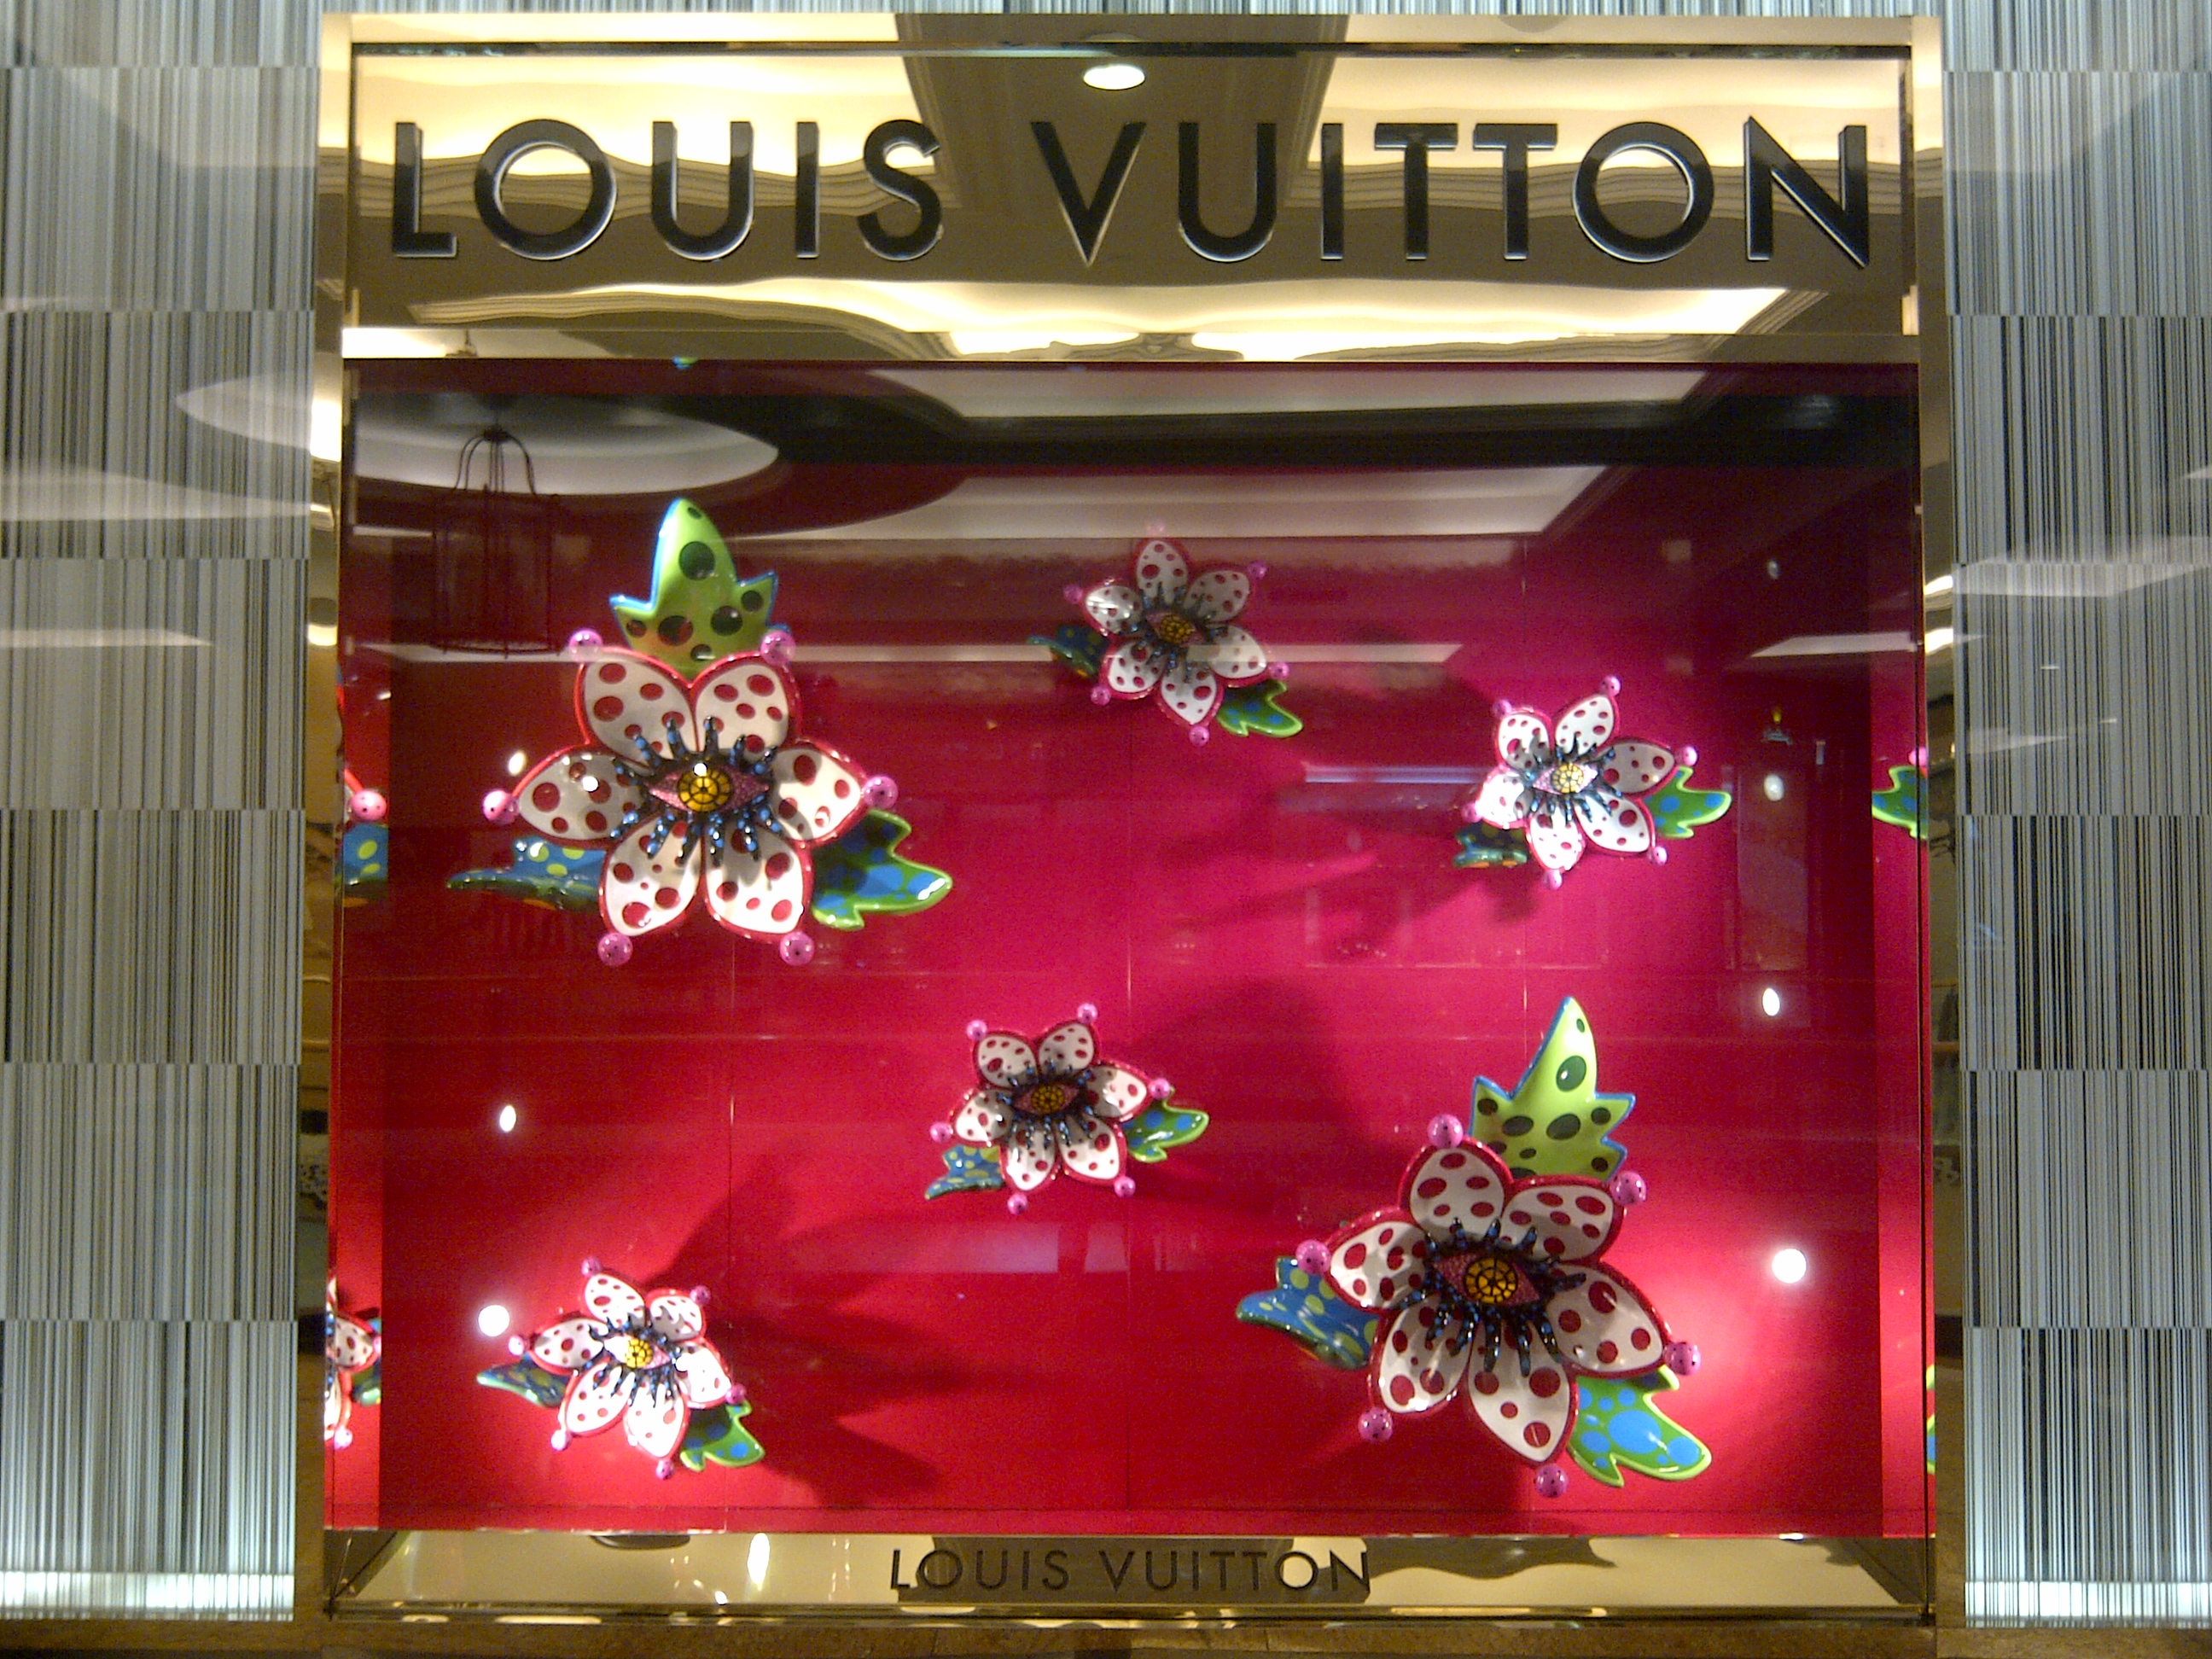 Postcard from Dubai: SEE LV Exhibition – View from the Back